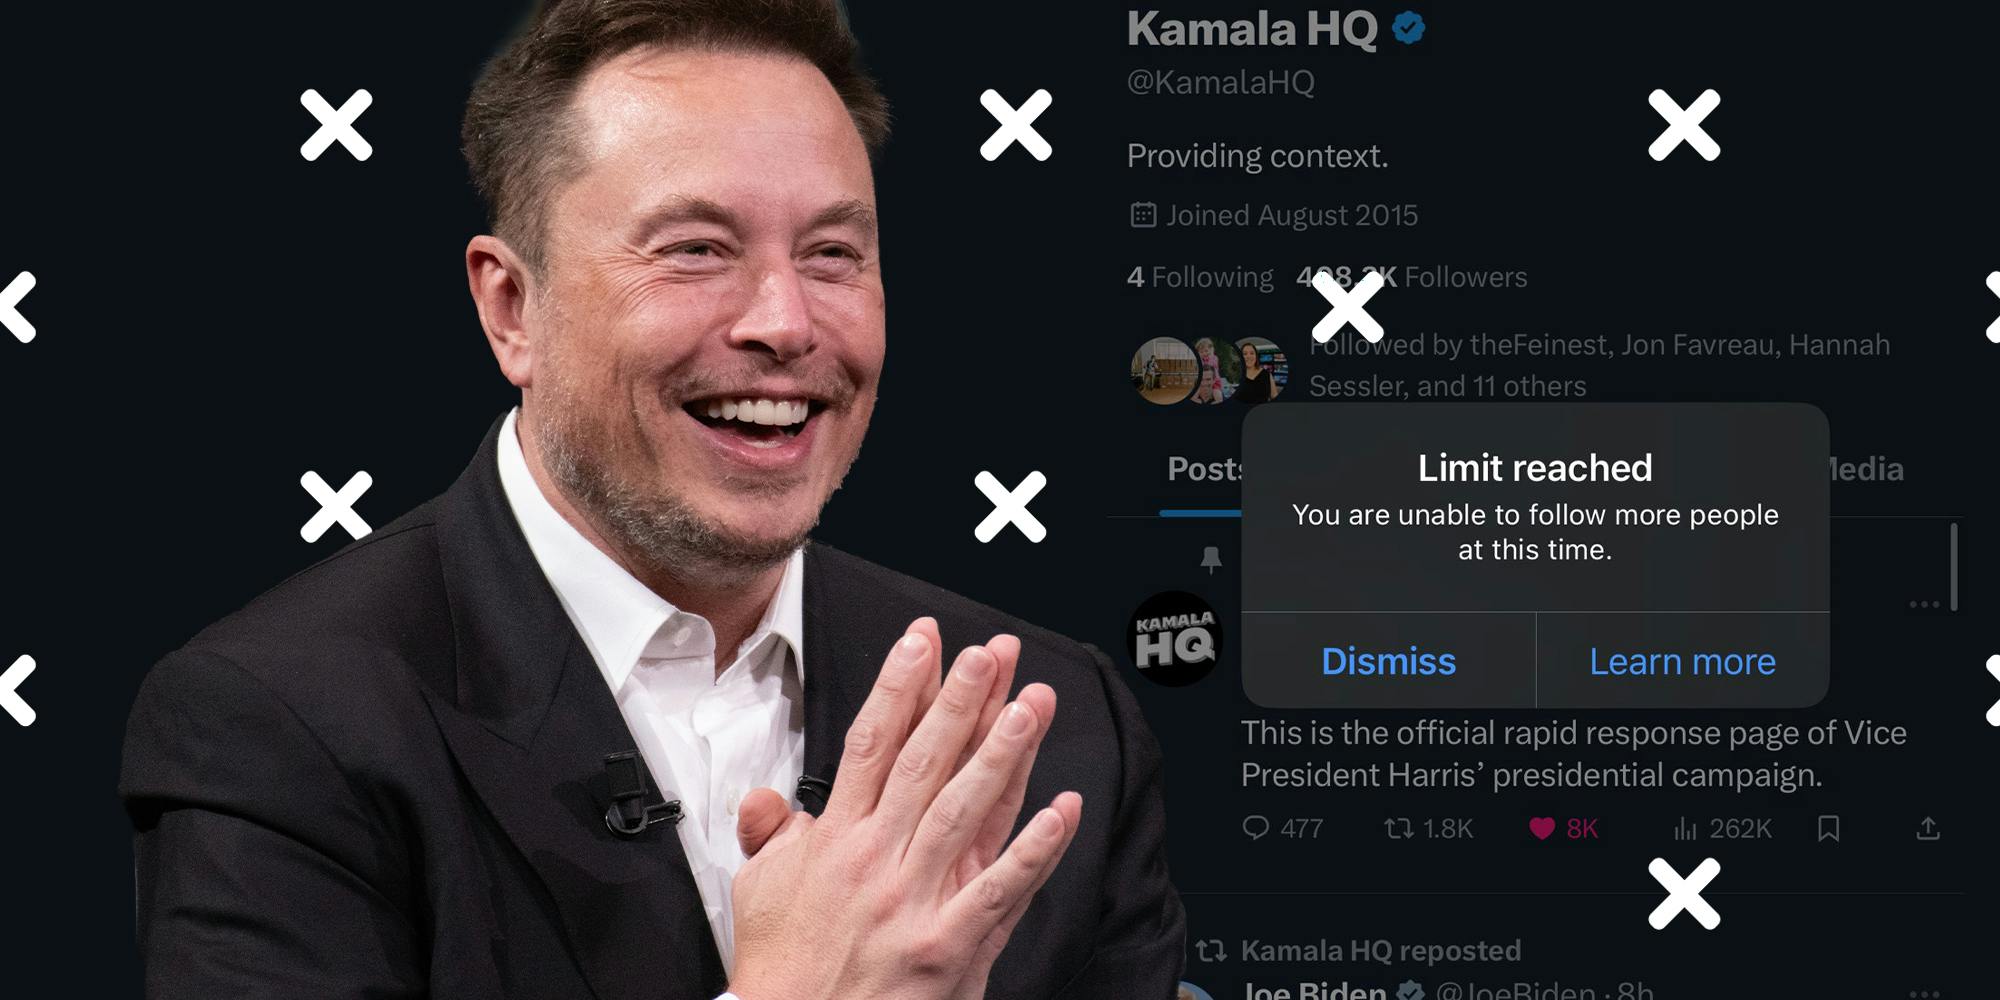 After Musk goes on a pro-Trump/Vance posting bender, people report they cant follow Kamala